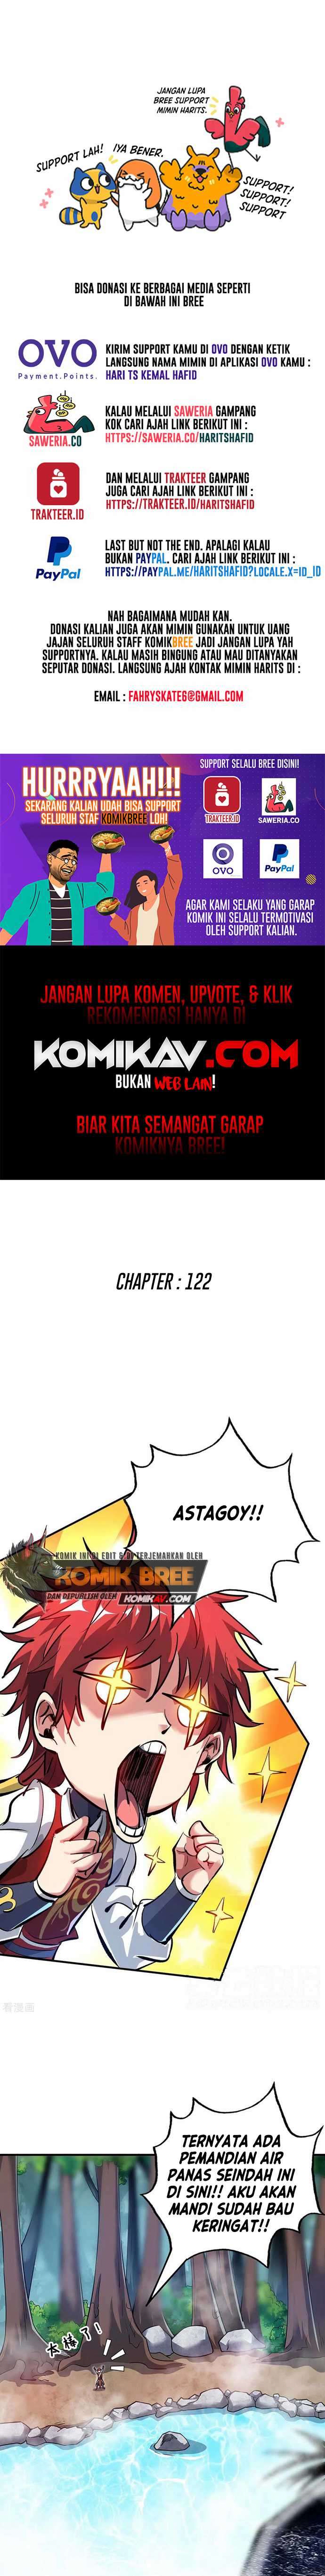 The First Son-In-Law Vanguard of All Time Chapter 122